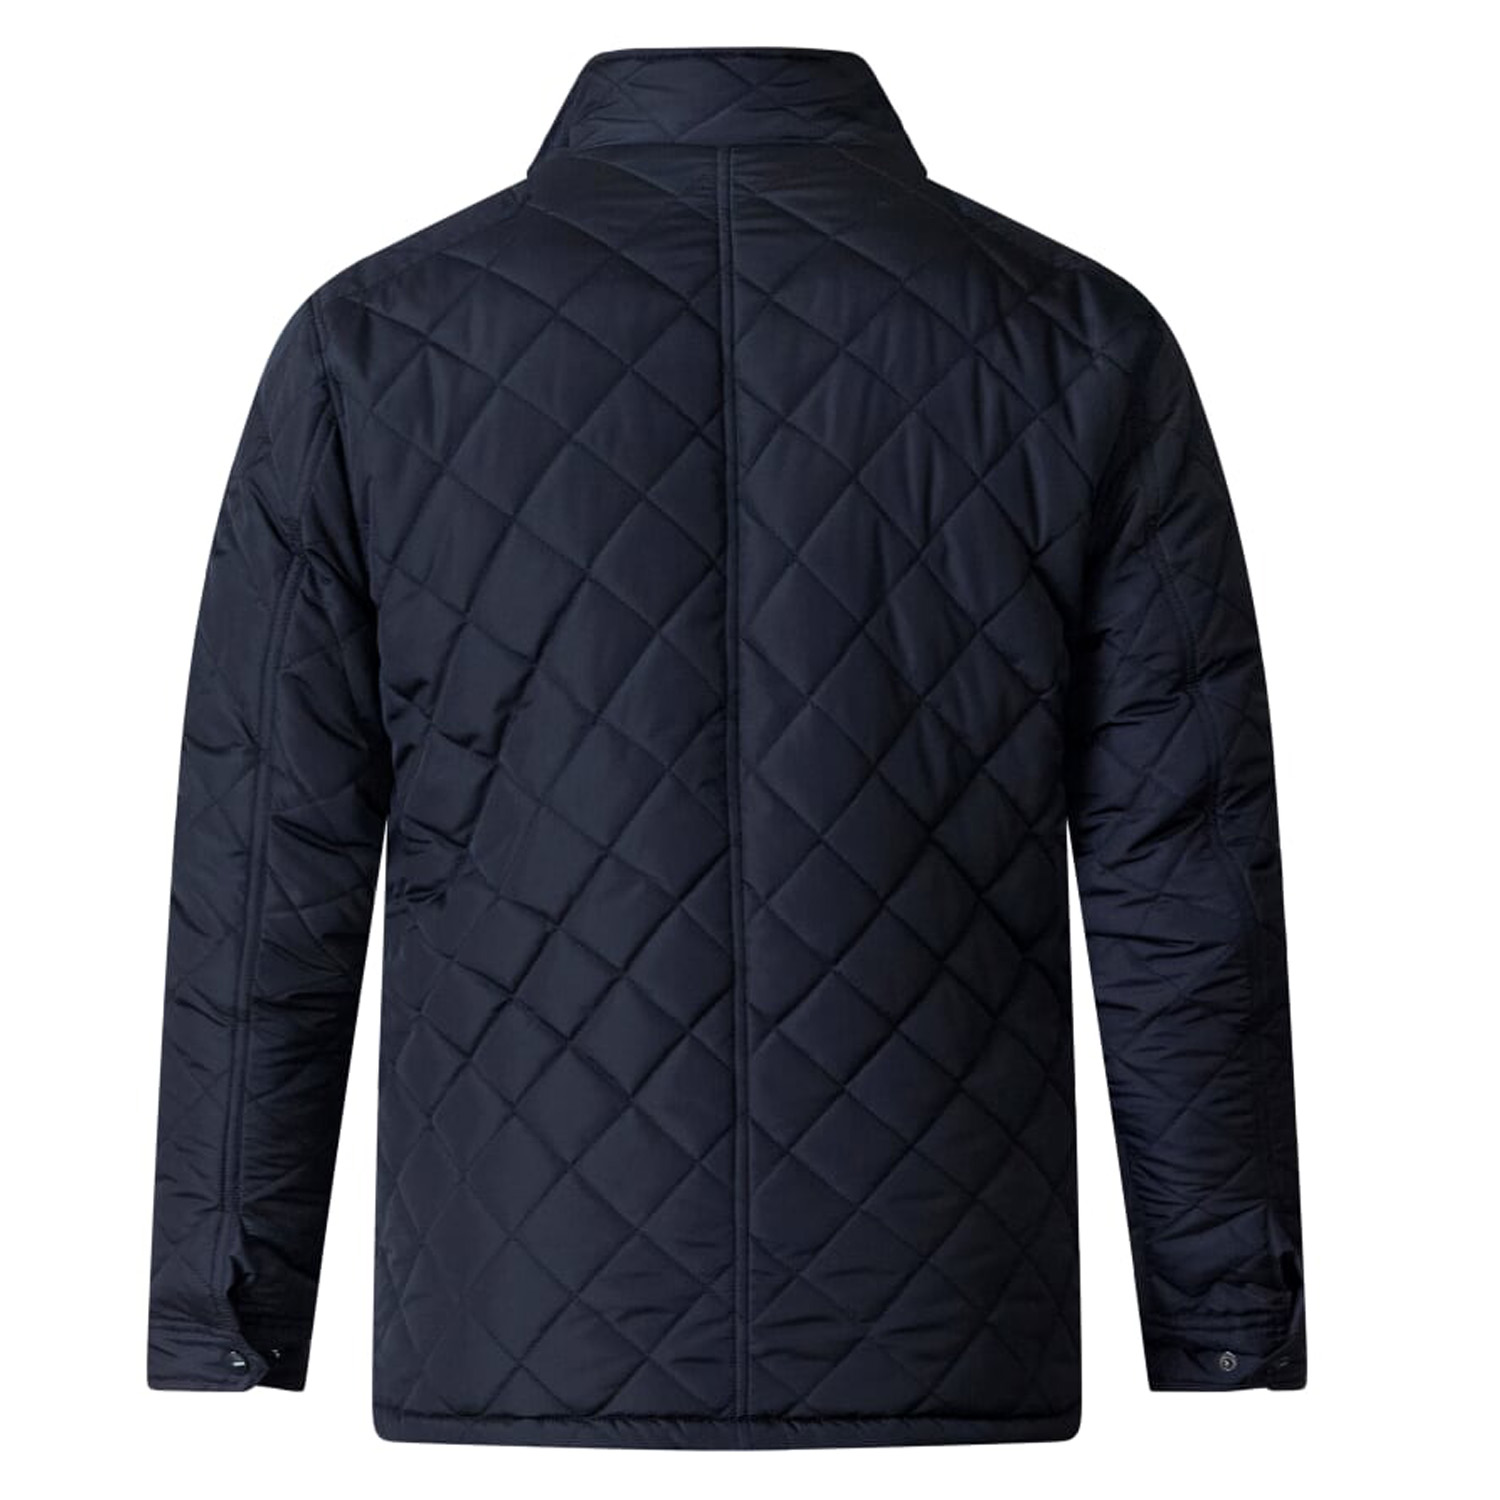 Duke D555 Big Tall King Size Mens Justin Quilted Jacket Soft Padded ...